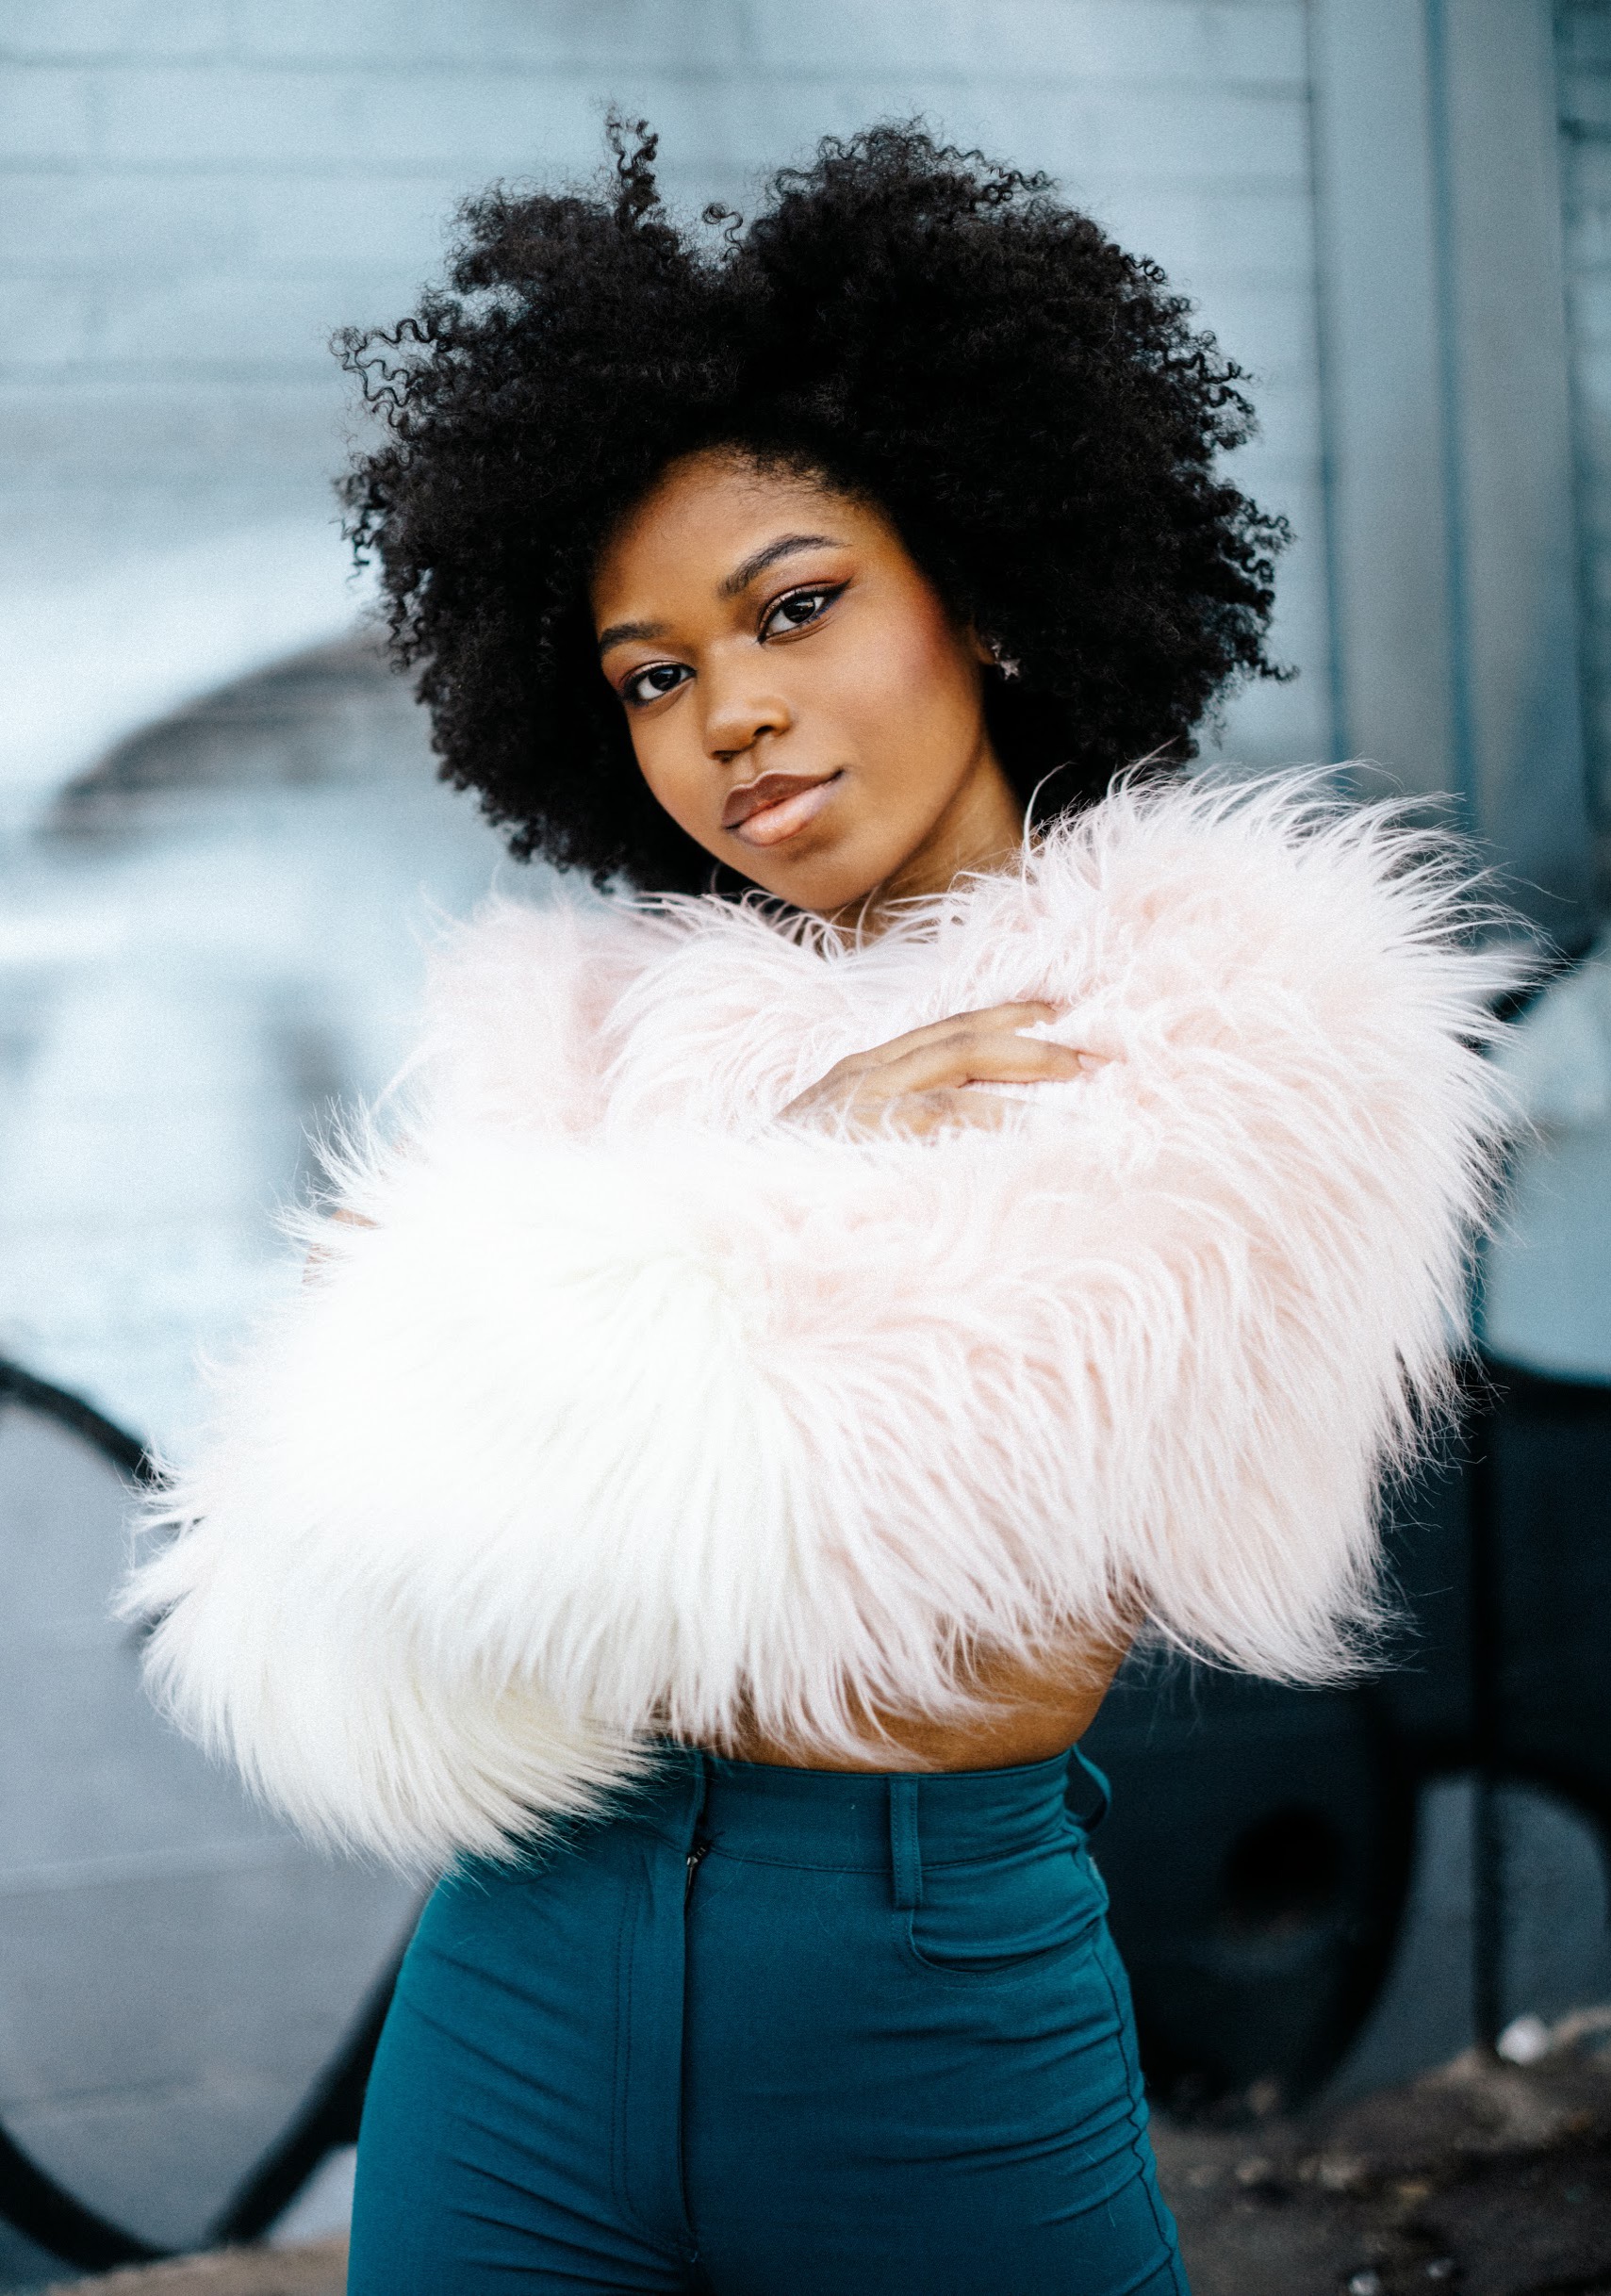 Riele Downs: Movies, TV